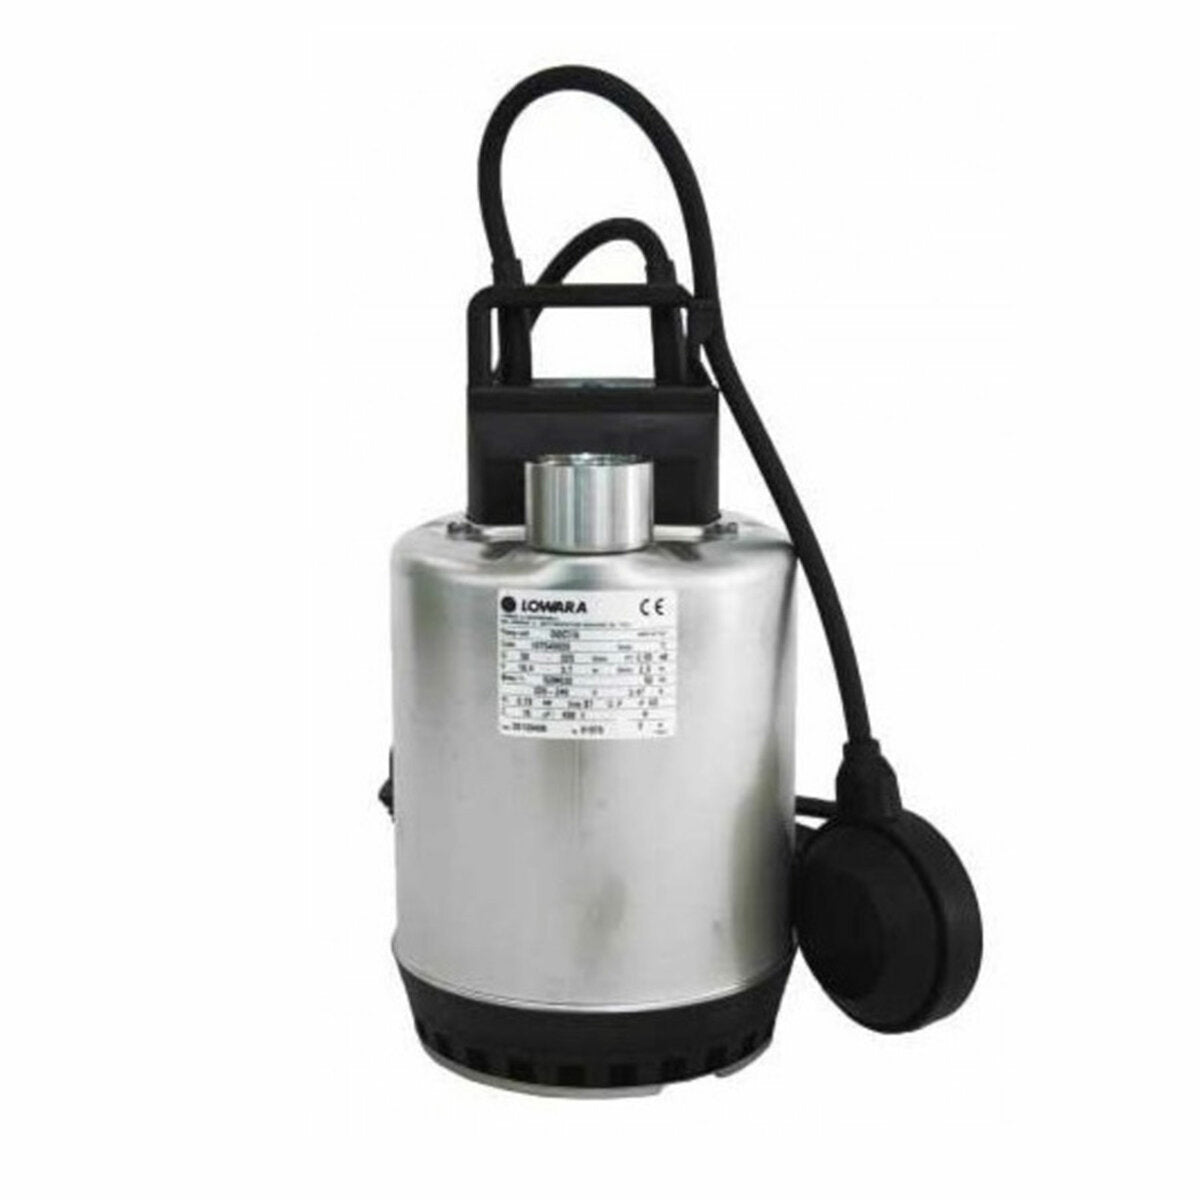 Lowara-Xylem submersible pump single-phase clear water hp 0.34 kW 0.25 Doc3 / a series